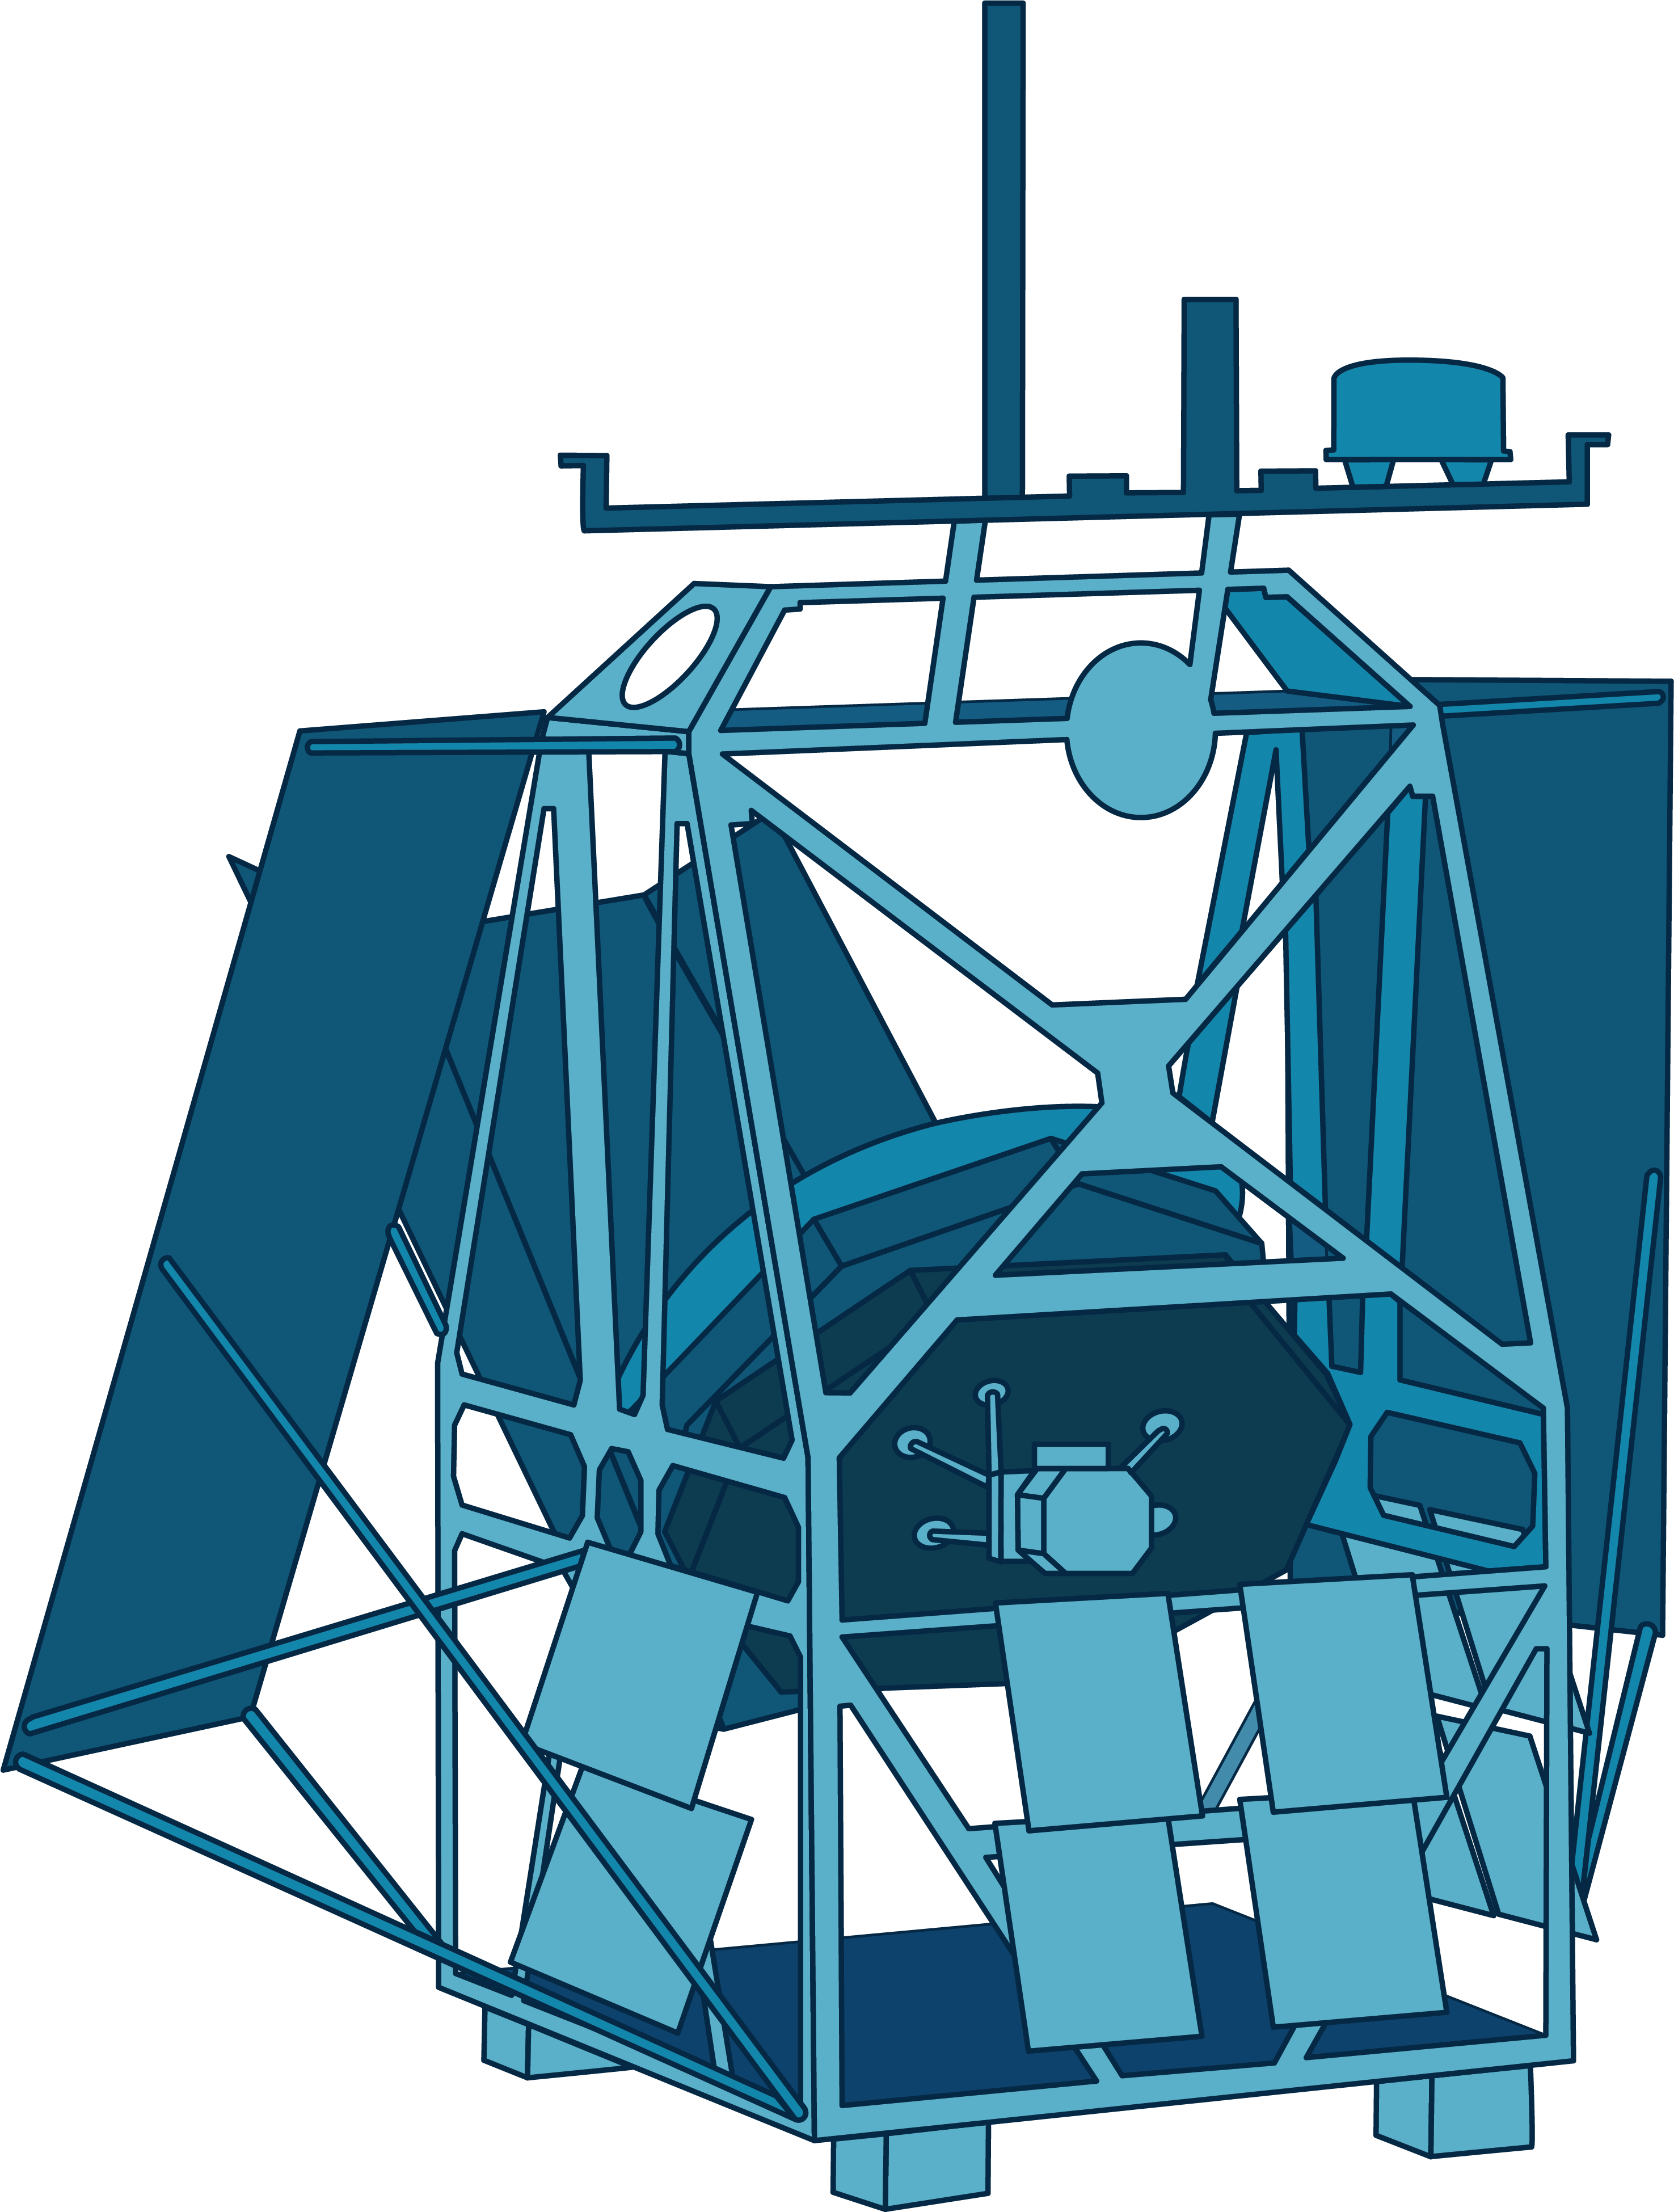 A graphic of ASTHROS is shown in light and dark shades of blue and has a main cage-like body with large, rectangular panels stemming from its sides, small square panels on its lower half, and a thin structure protruding from the top. (This structure will attach to a large balloon). A telescope protrudes from the back of the structure.